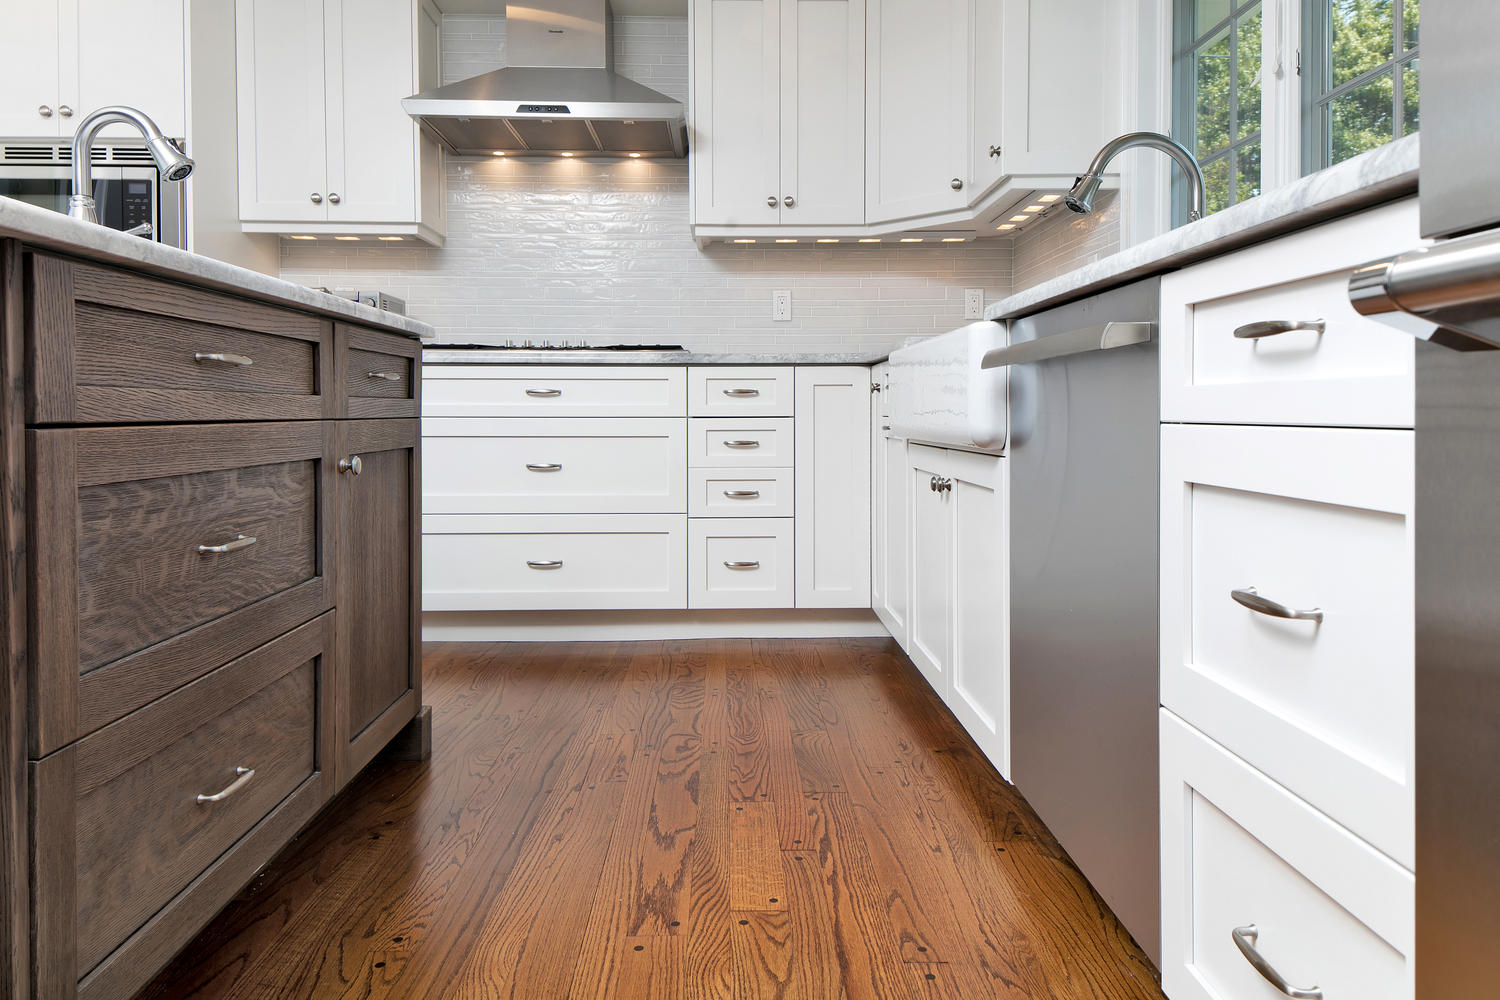 Custom Built Shaker Cabinets Sea Girt New Jersey by Design Line Kitchens